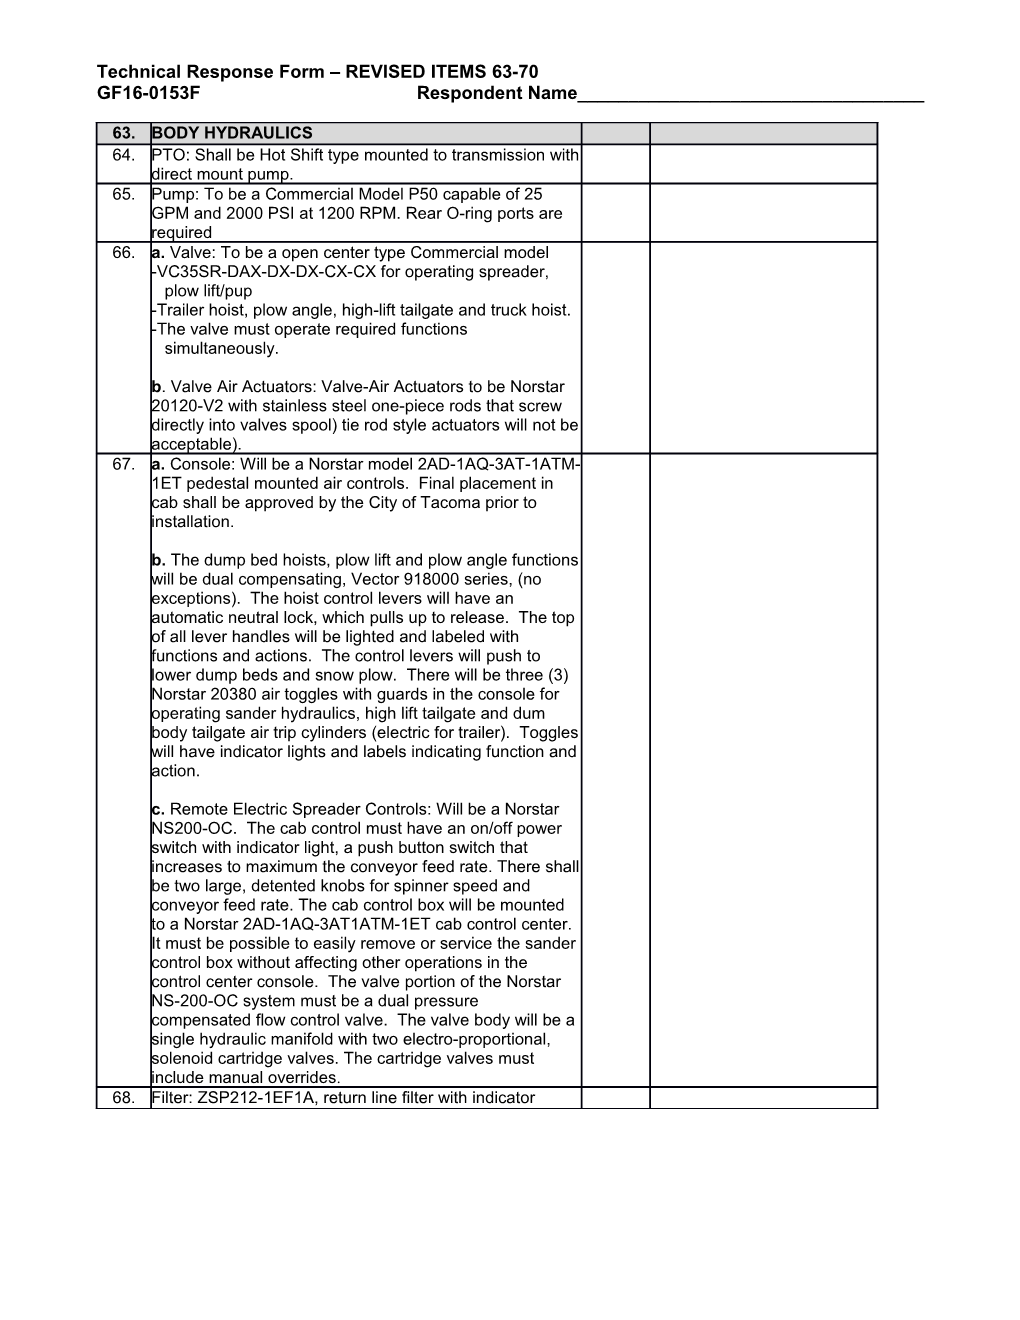 Technical Response Form REVISED ITEMS 63-70